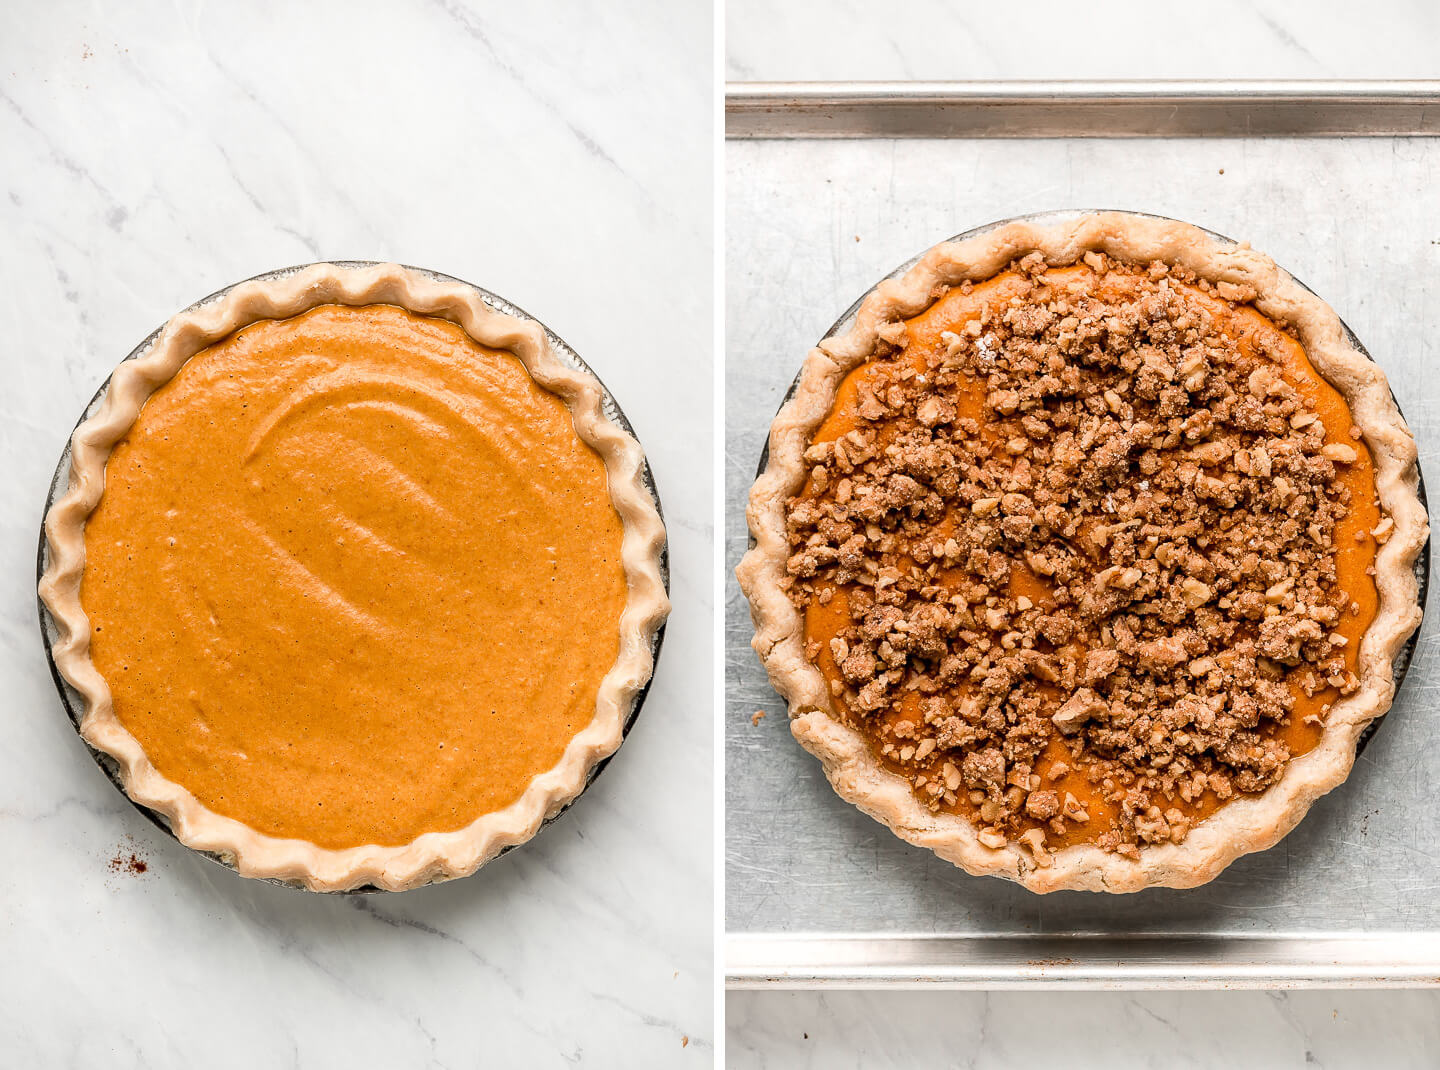 Diptych- A pie crust filled with homemade pumpkin filling; topped with a walnut streusel.